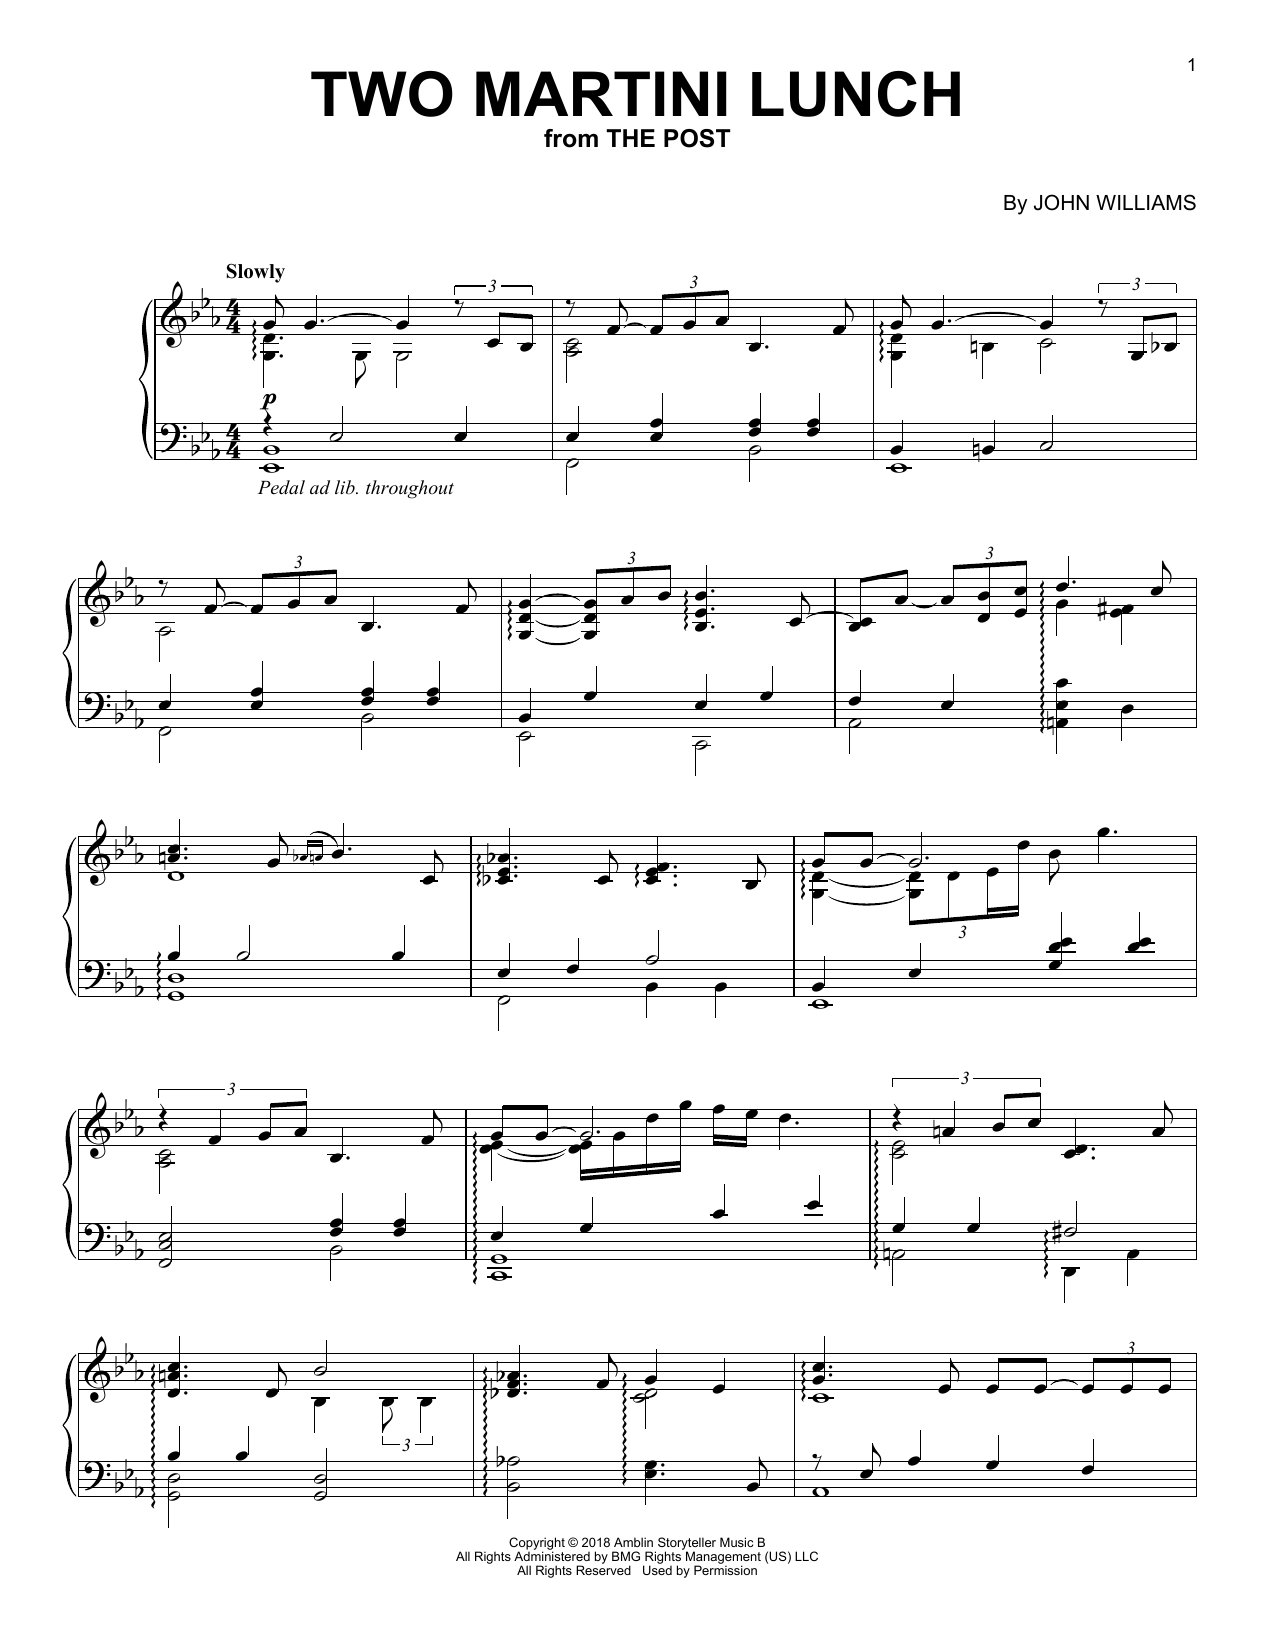 Download John Williams Two Martini Lunch (from The Post) Sheet Music